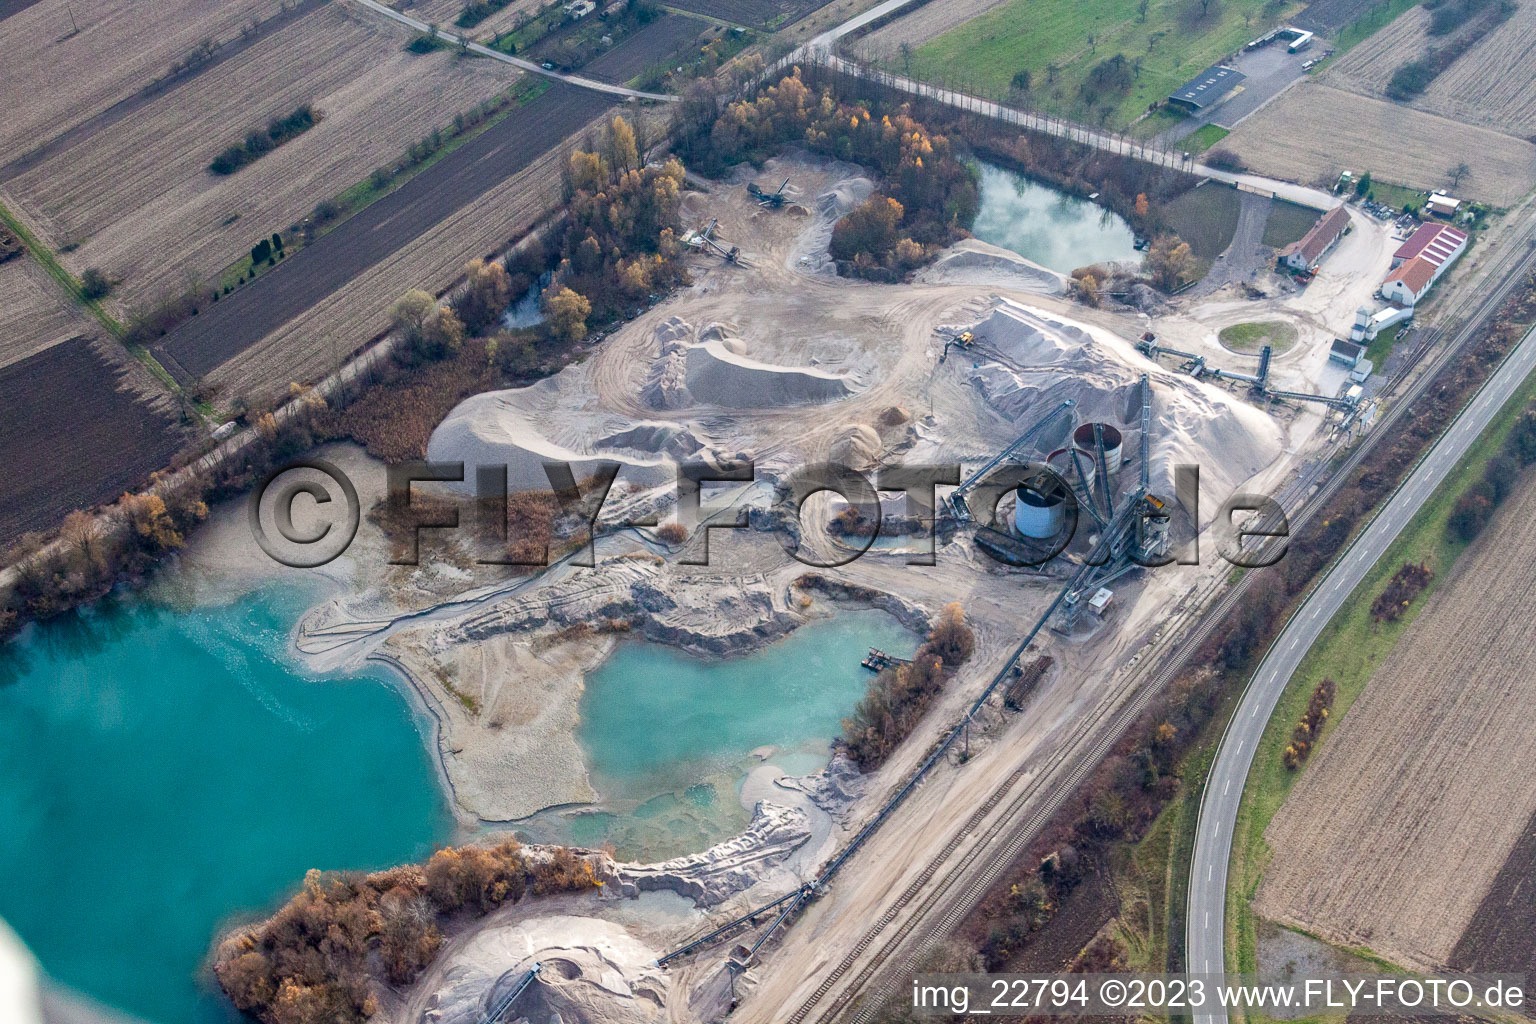 Bird's eye view of Quarry pond in Hagenbach in the state Rhineland-Palatinate, Germany